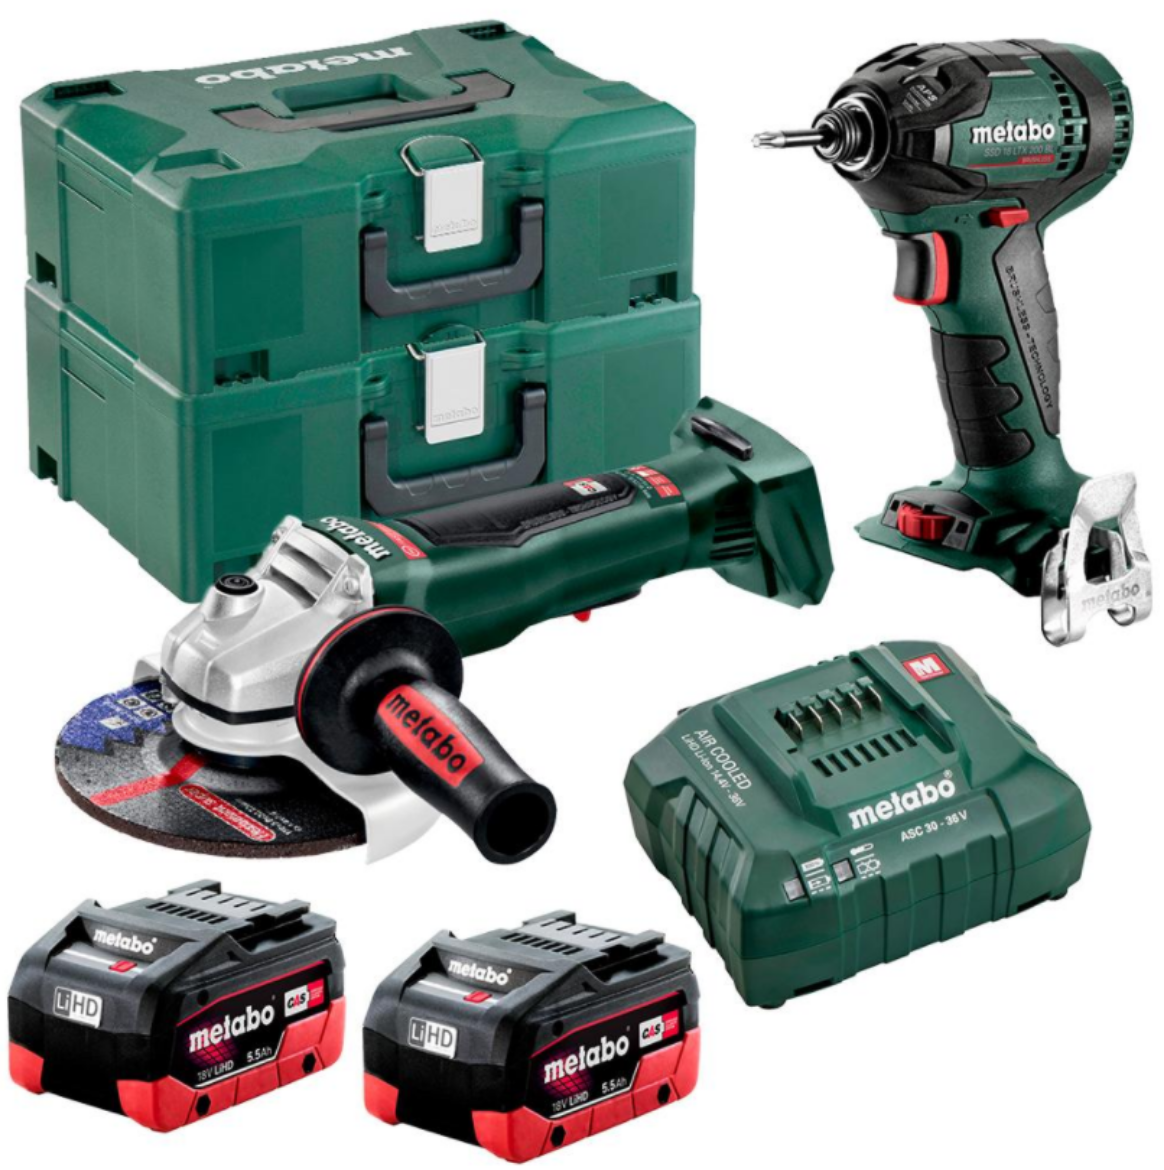 Picture of METABO 2 PIECE KIT 18 V BRUSHLESS 1/4" IMPACT DRIVER MAX TORQUE 200 NM + 18V BRUSHLESS 125MM ANGLE GRINDER - SSD WPB 125 BL M HD 5.5